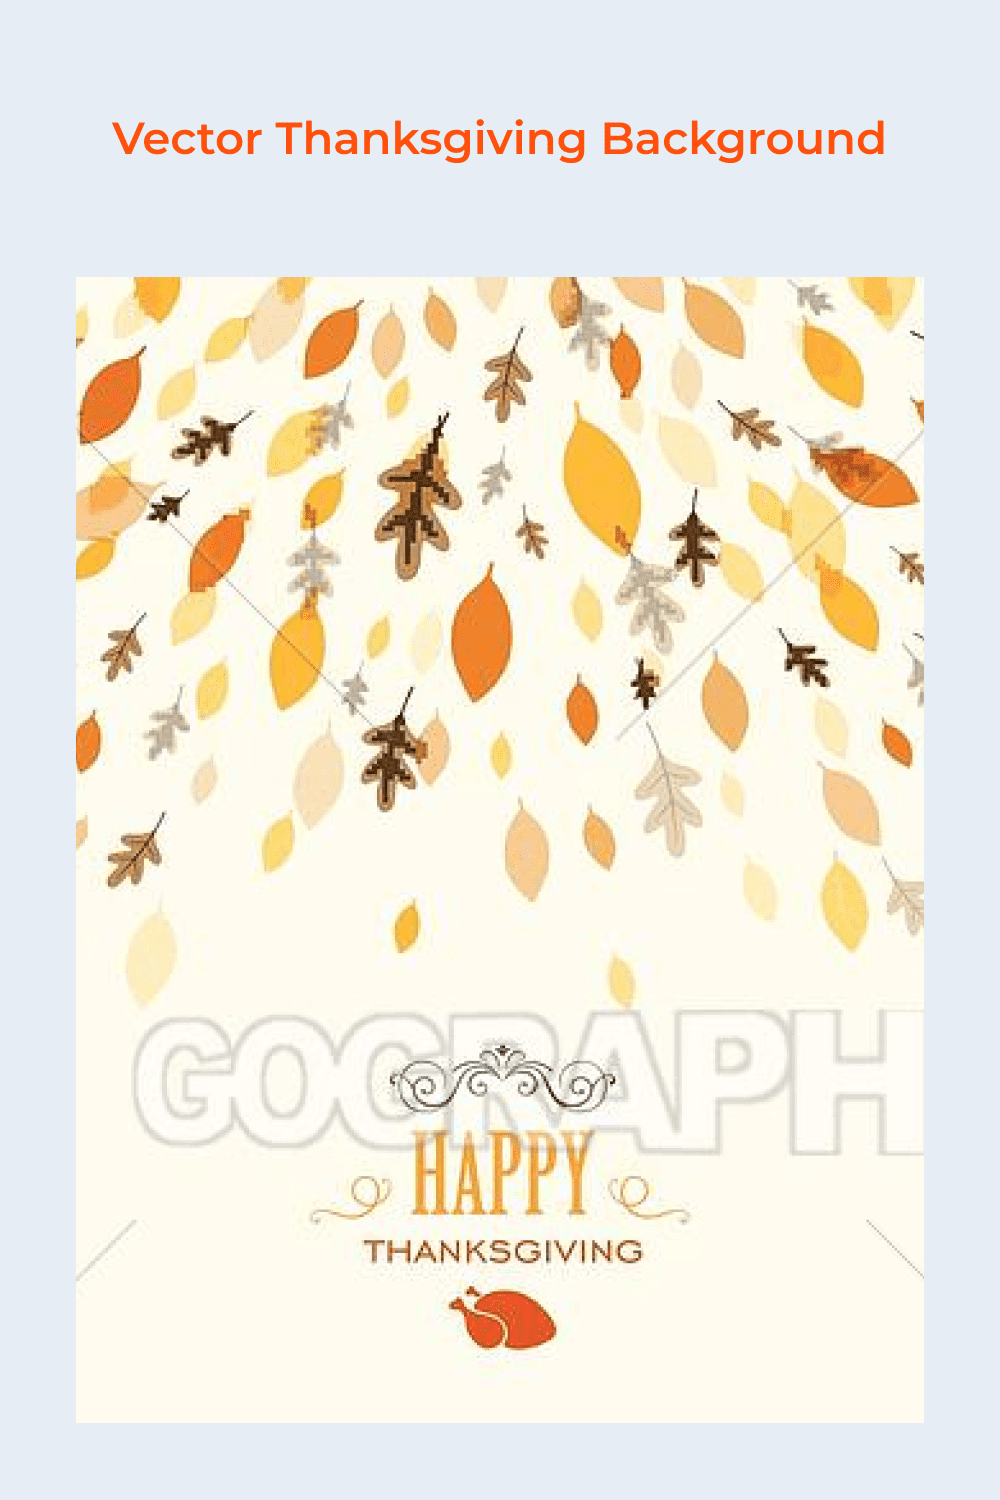 Vector Thanksgiving background.